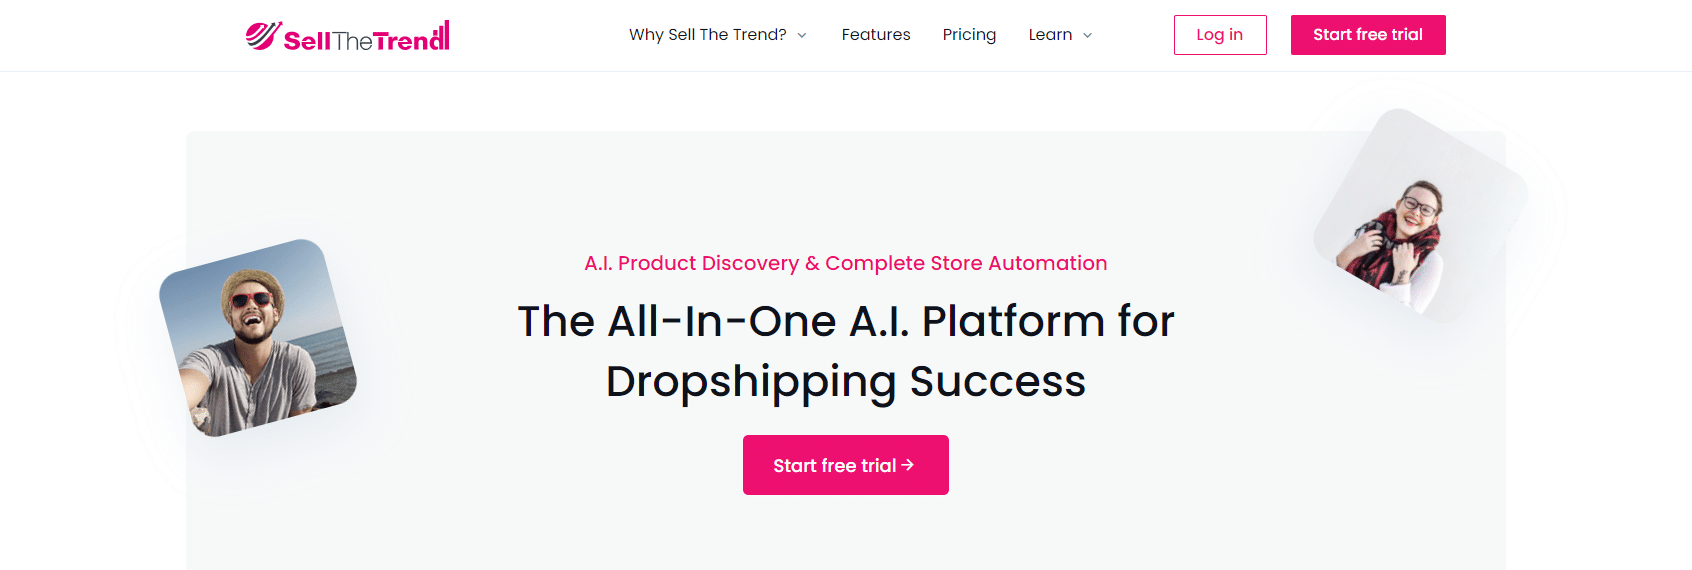 Sell the trend all in one ai-platform.png